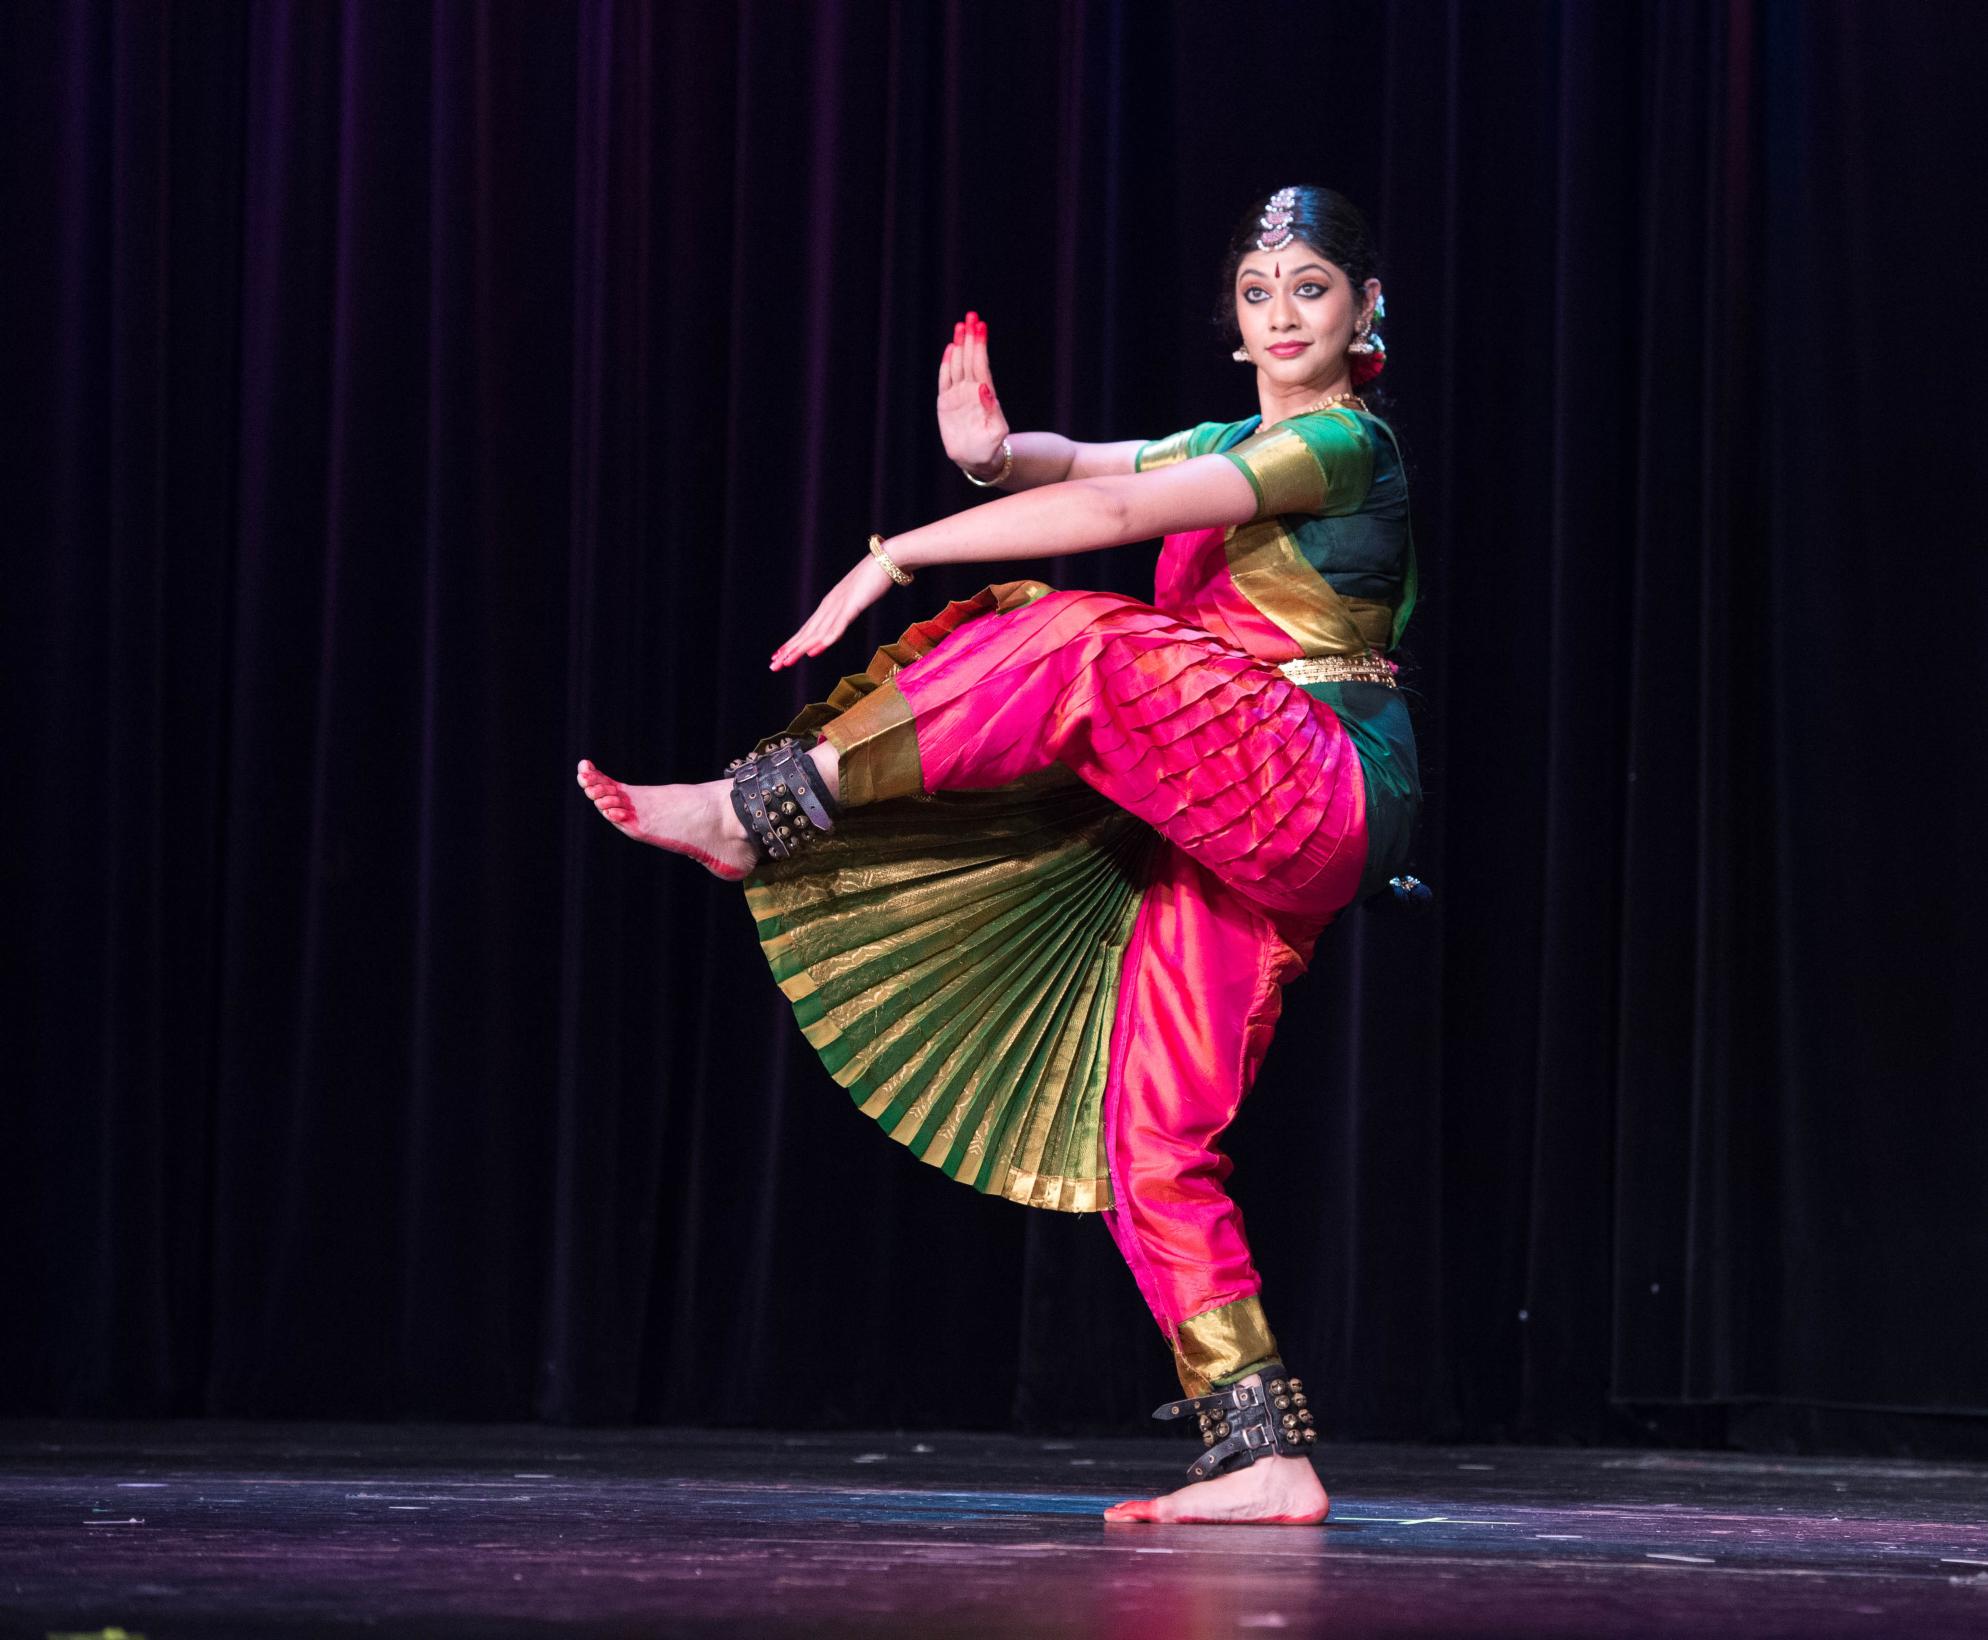 Why do people think the Bharatanatyam Dance is for 'girls' when it was  created by a man and Lord Shiva, and Ganesha and Krishna are all 'Gods'  known for dancing? - Quora